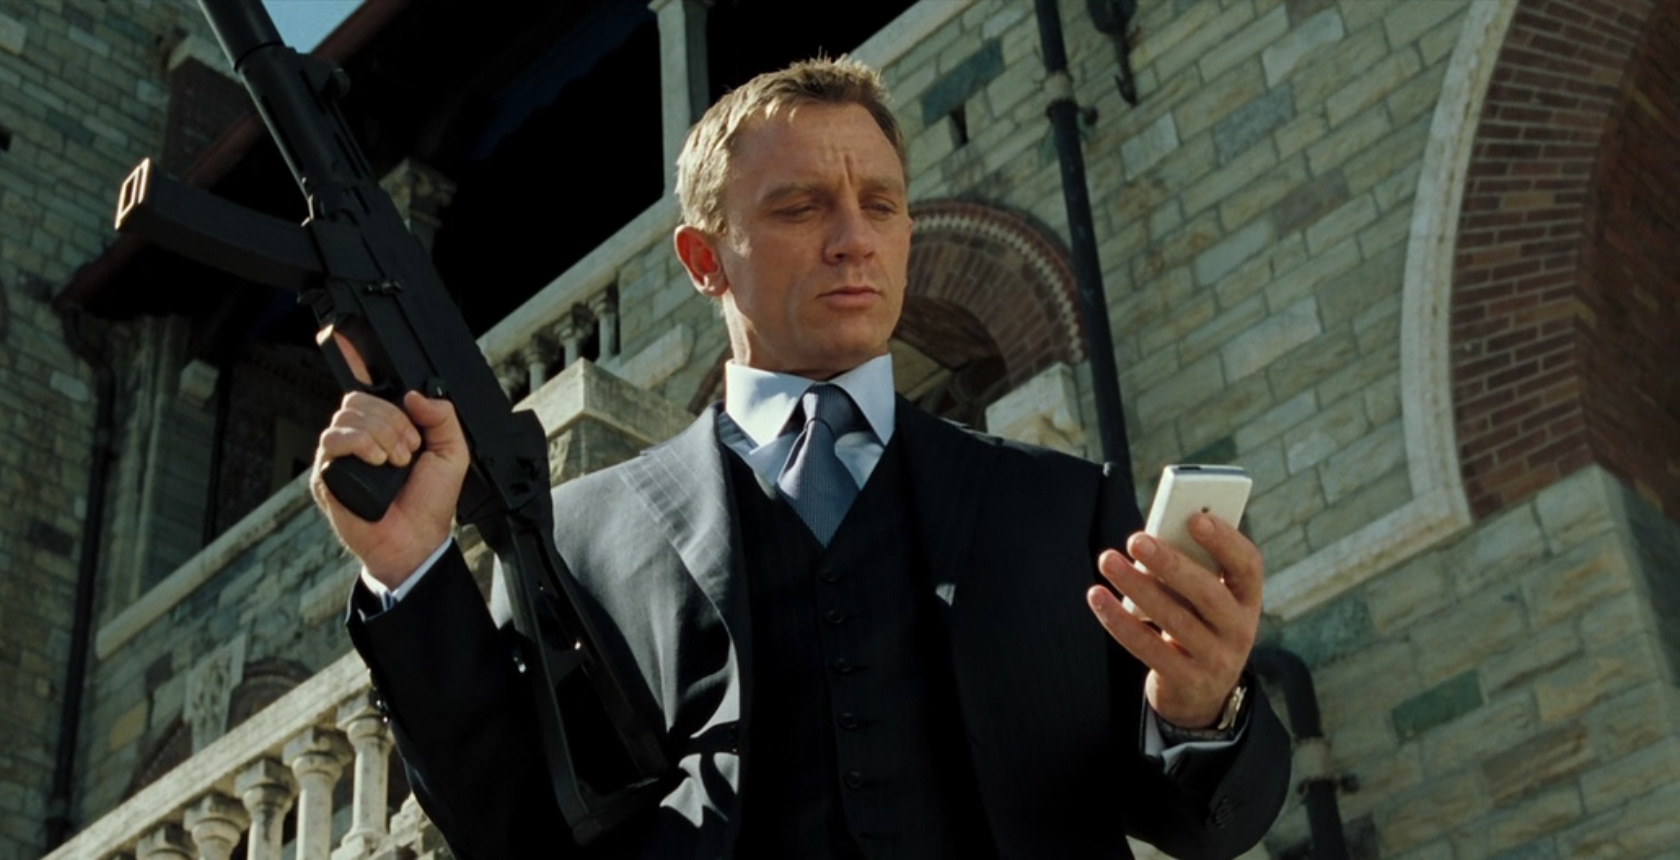 Casino Royale on Blu-Ray and Digital HD Only $5.96! (Reg $22.96)